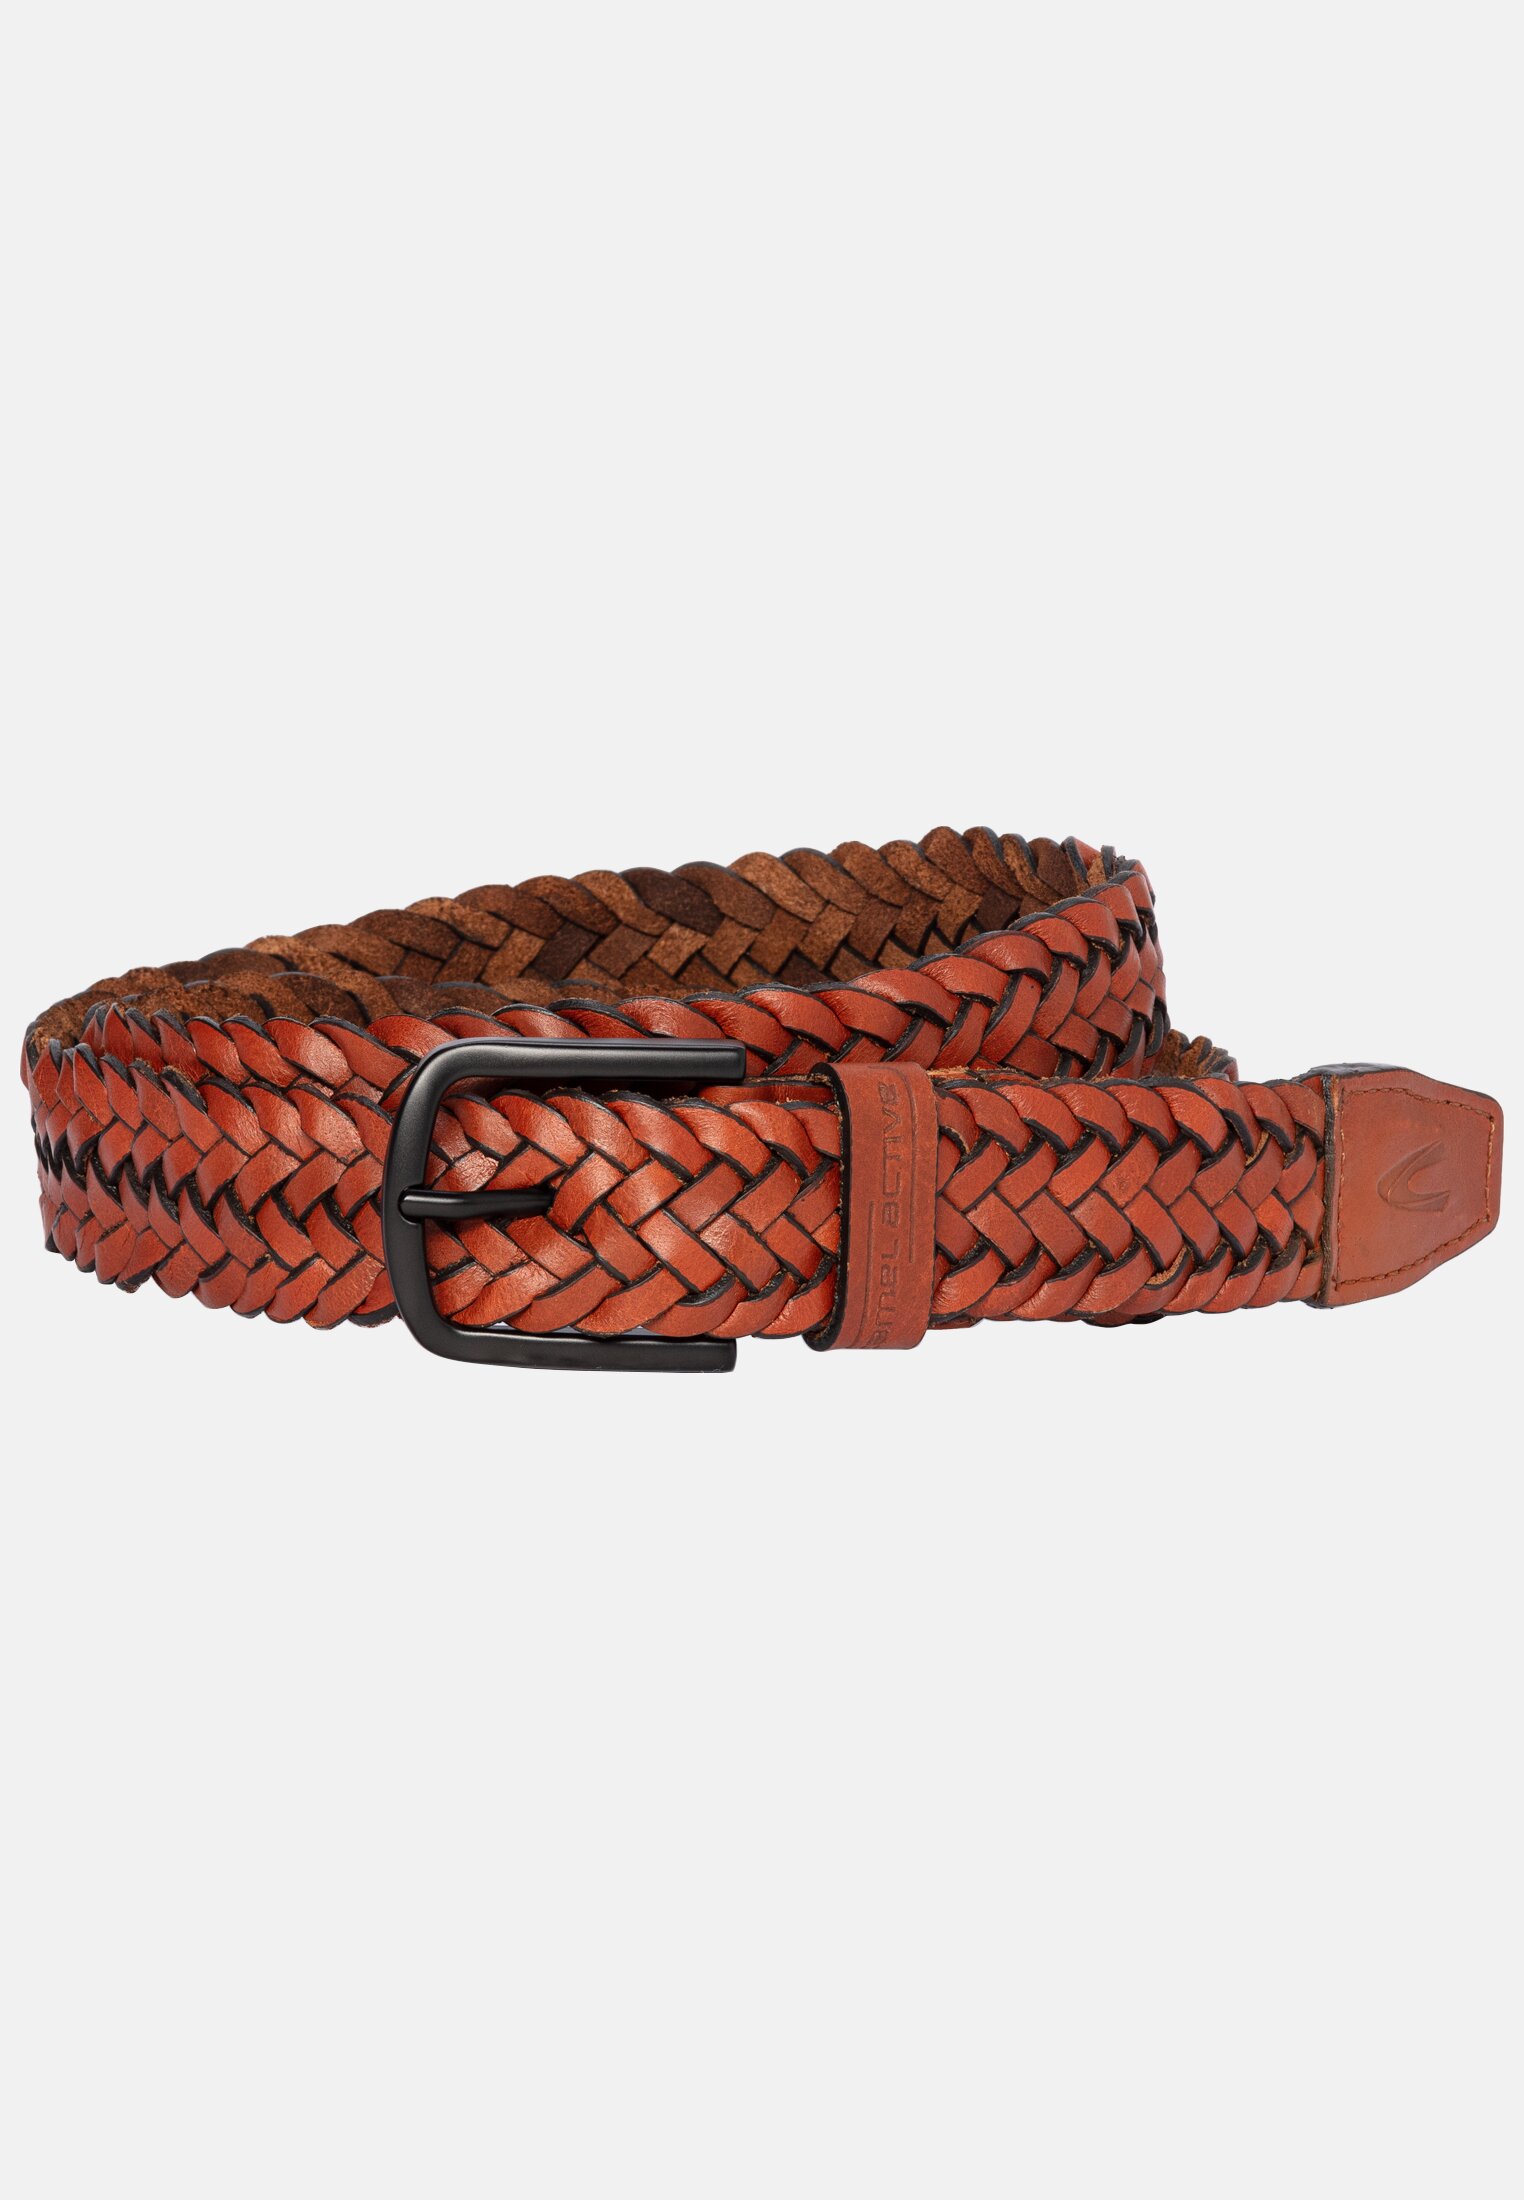 Camel Active Braided leather belt